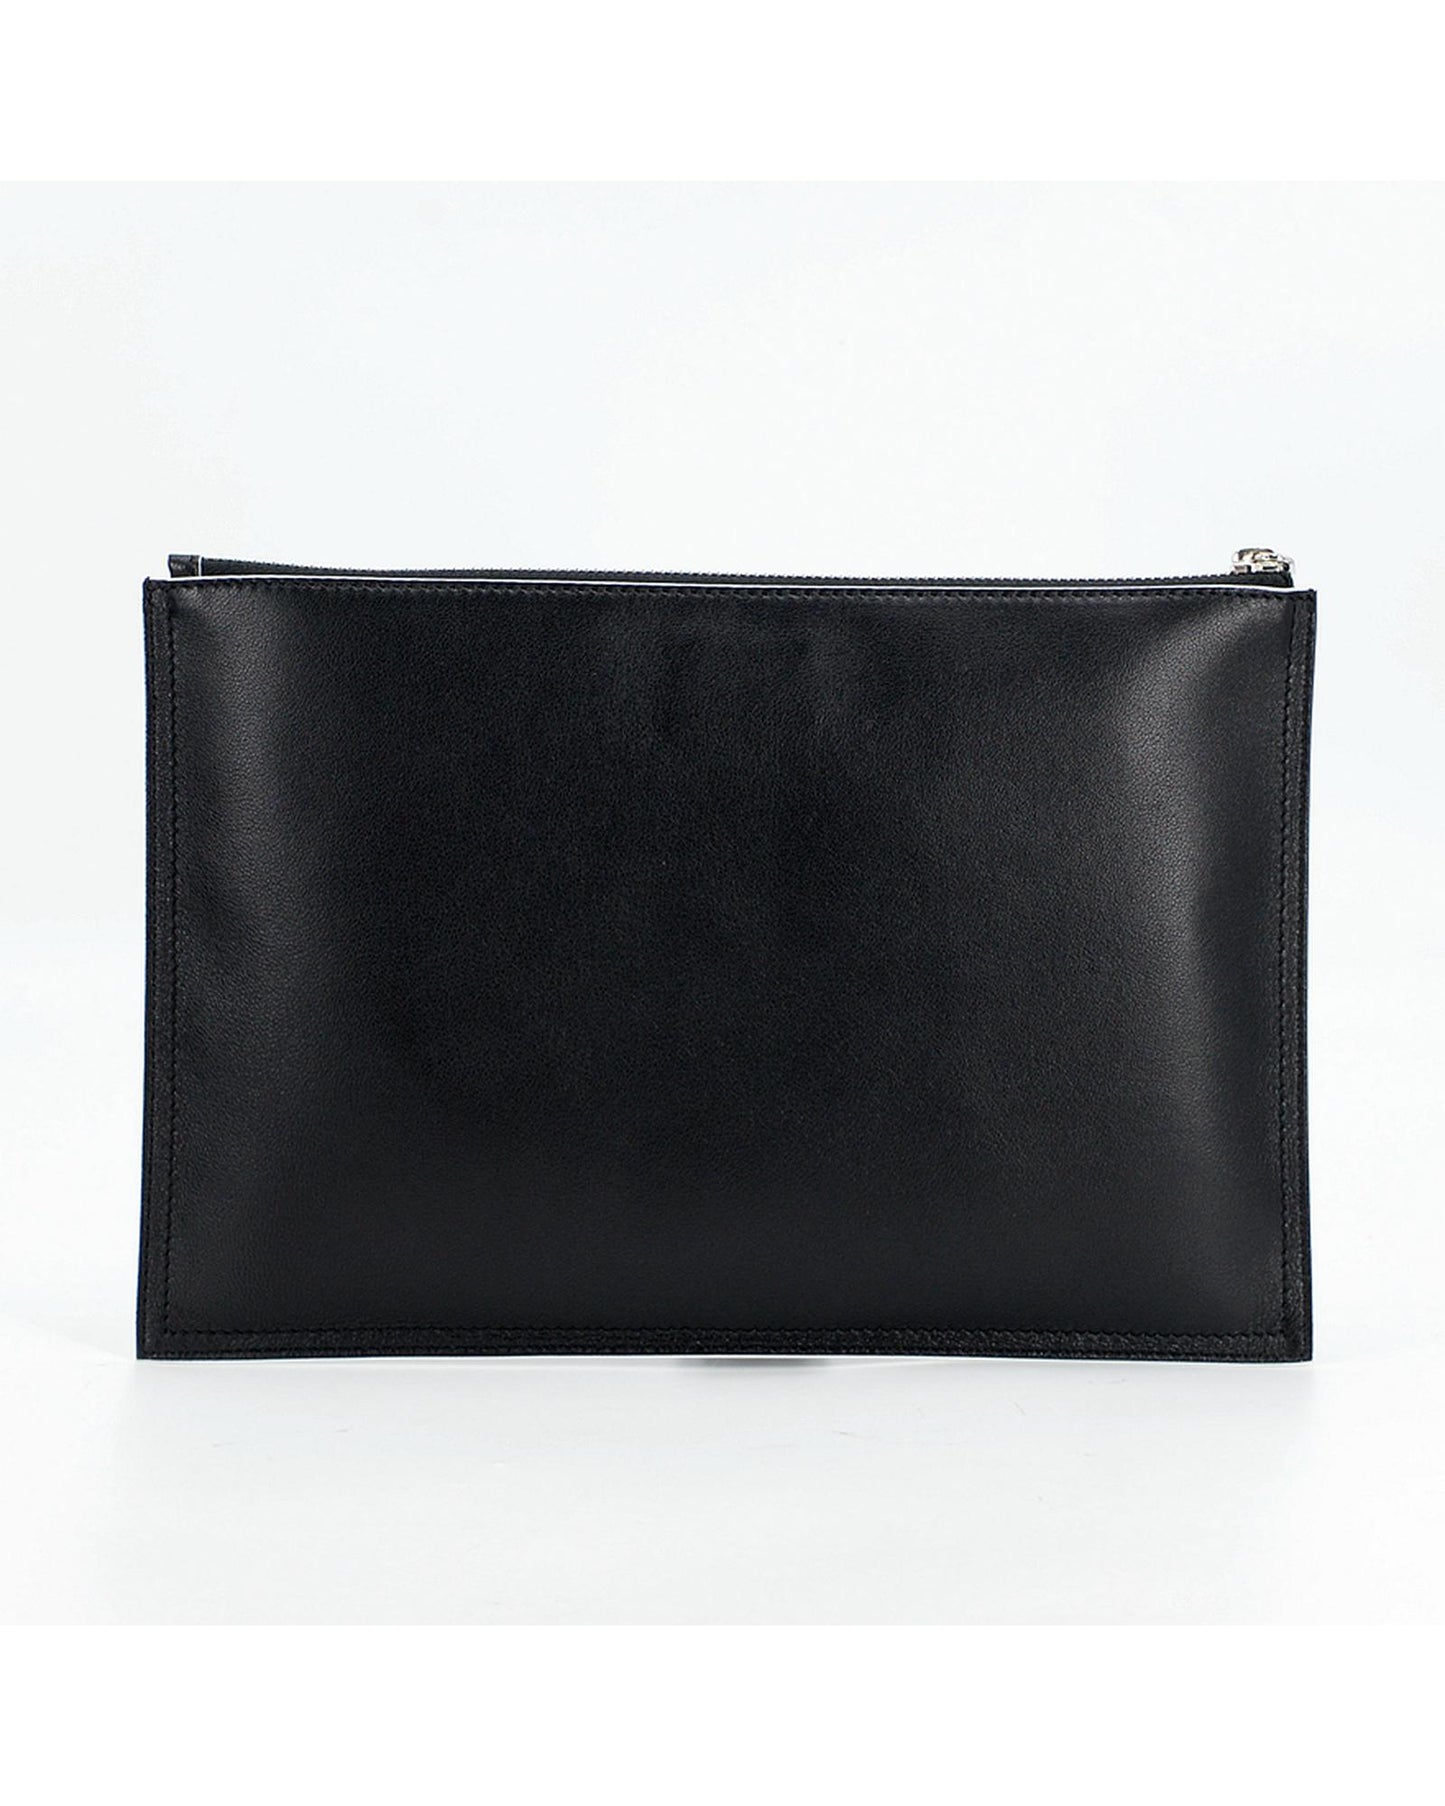 Givenchy Women's Black Leather Clutch Bag in Excellent Condition in Black